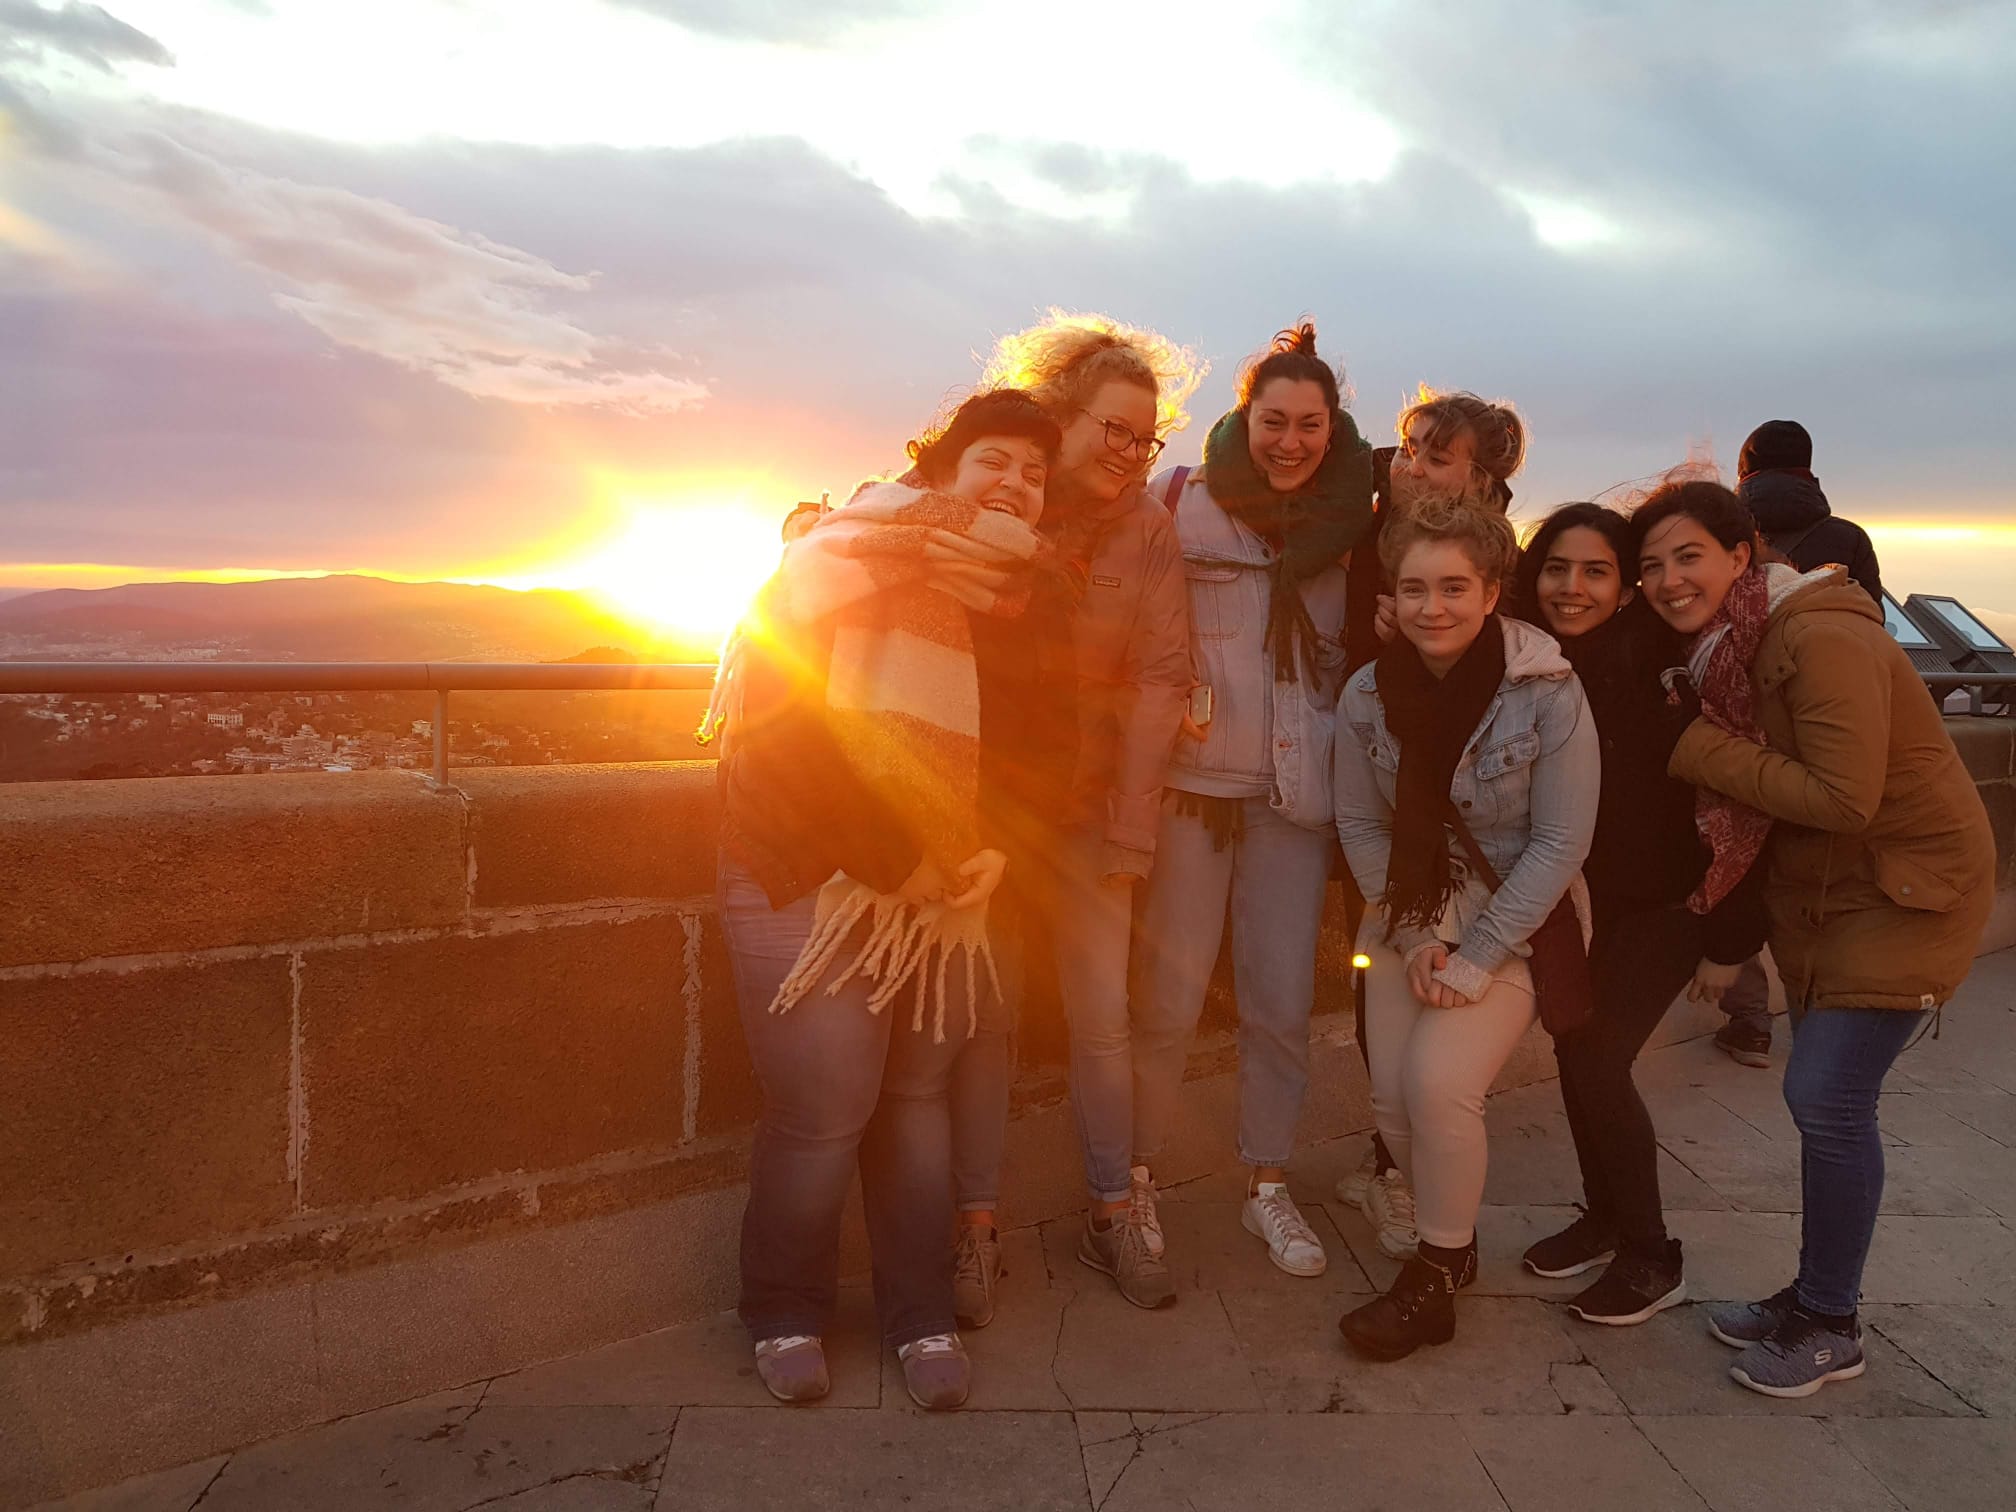 A beautiful sunset in Barcelona with amazing people 